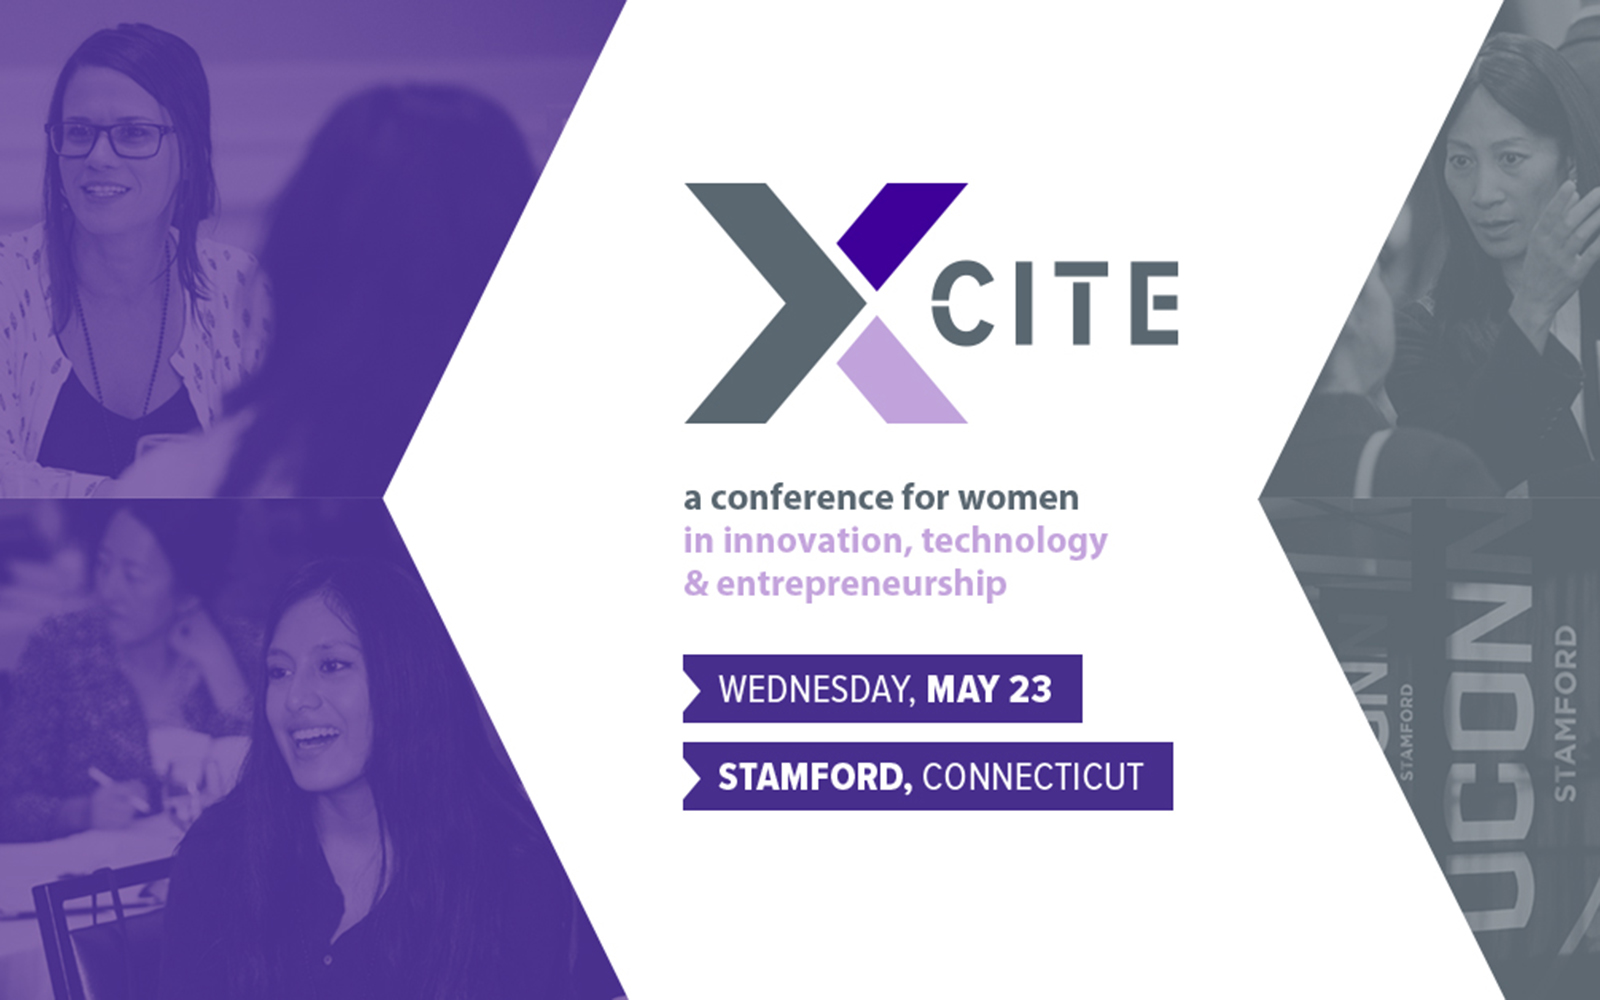 xCITE 2018 Conference for Women in Innovation, Technology, and Entrepreneurship